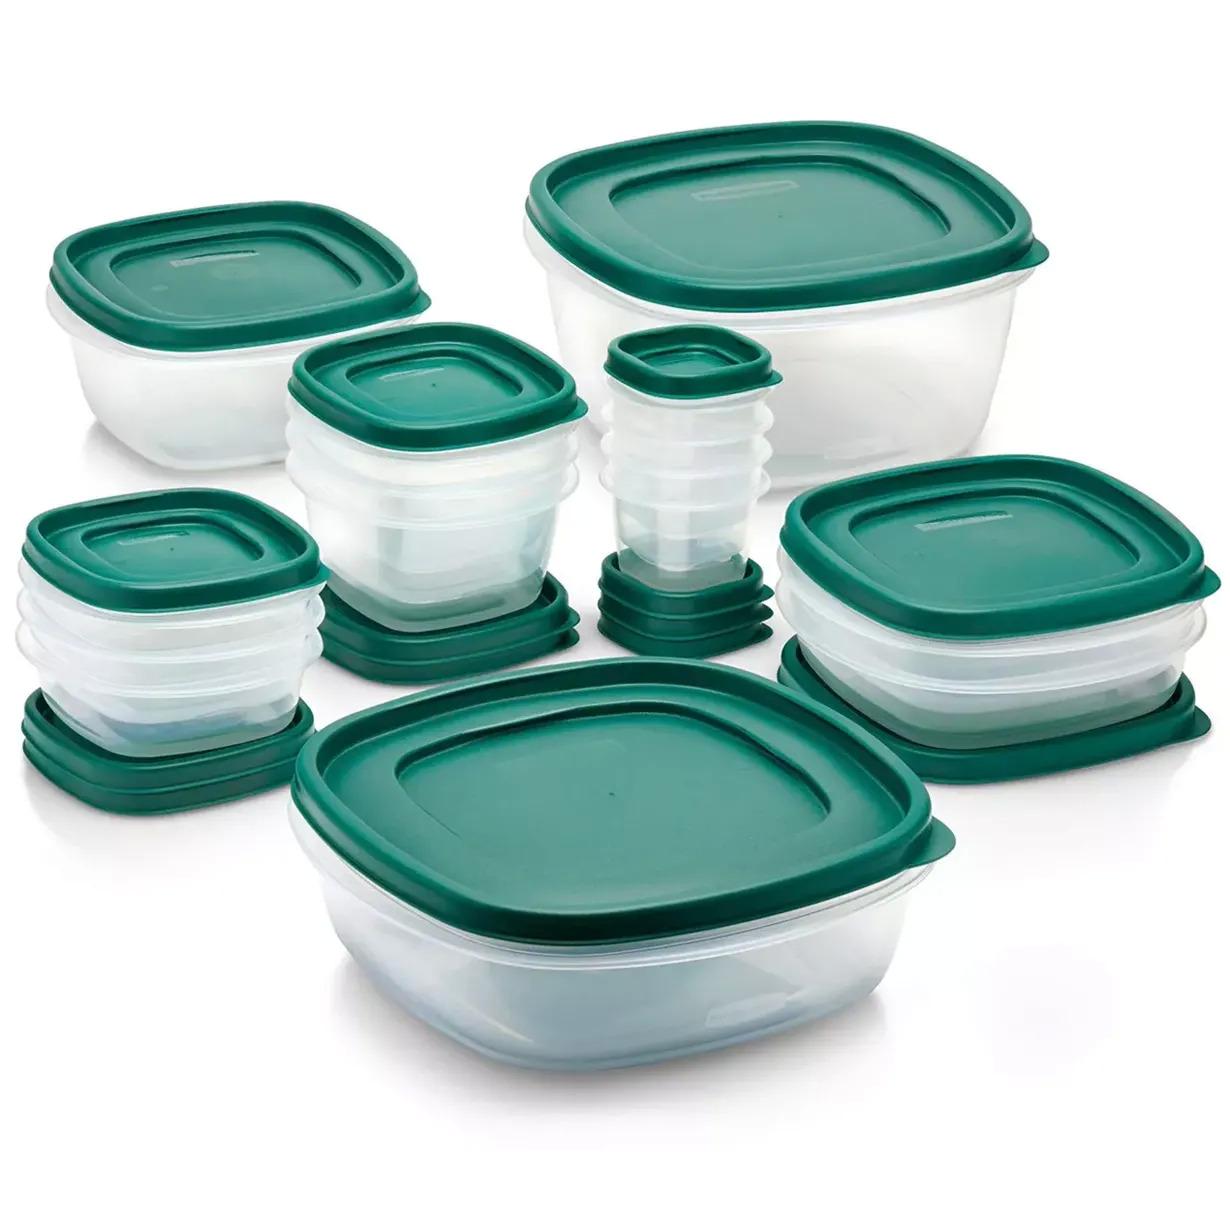 30-Piece Rubbermaid Plastic Food Container Set for $7.99